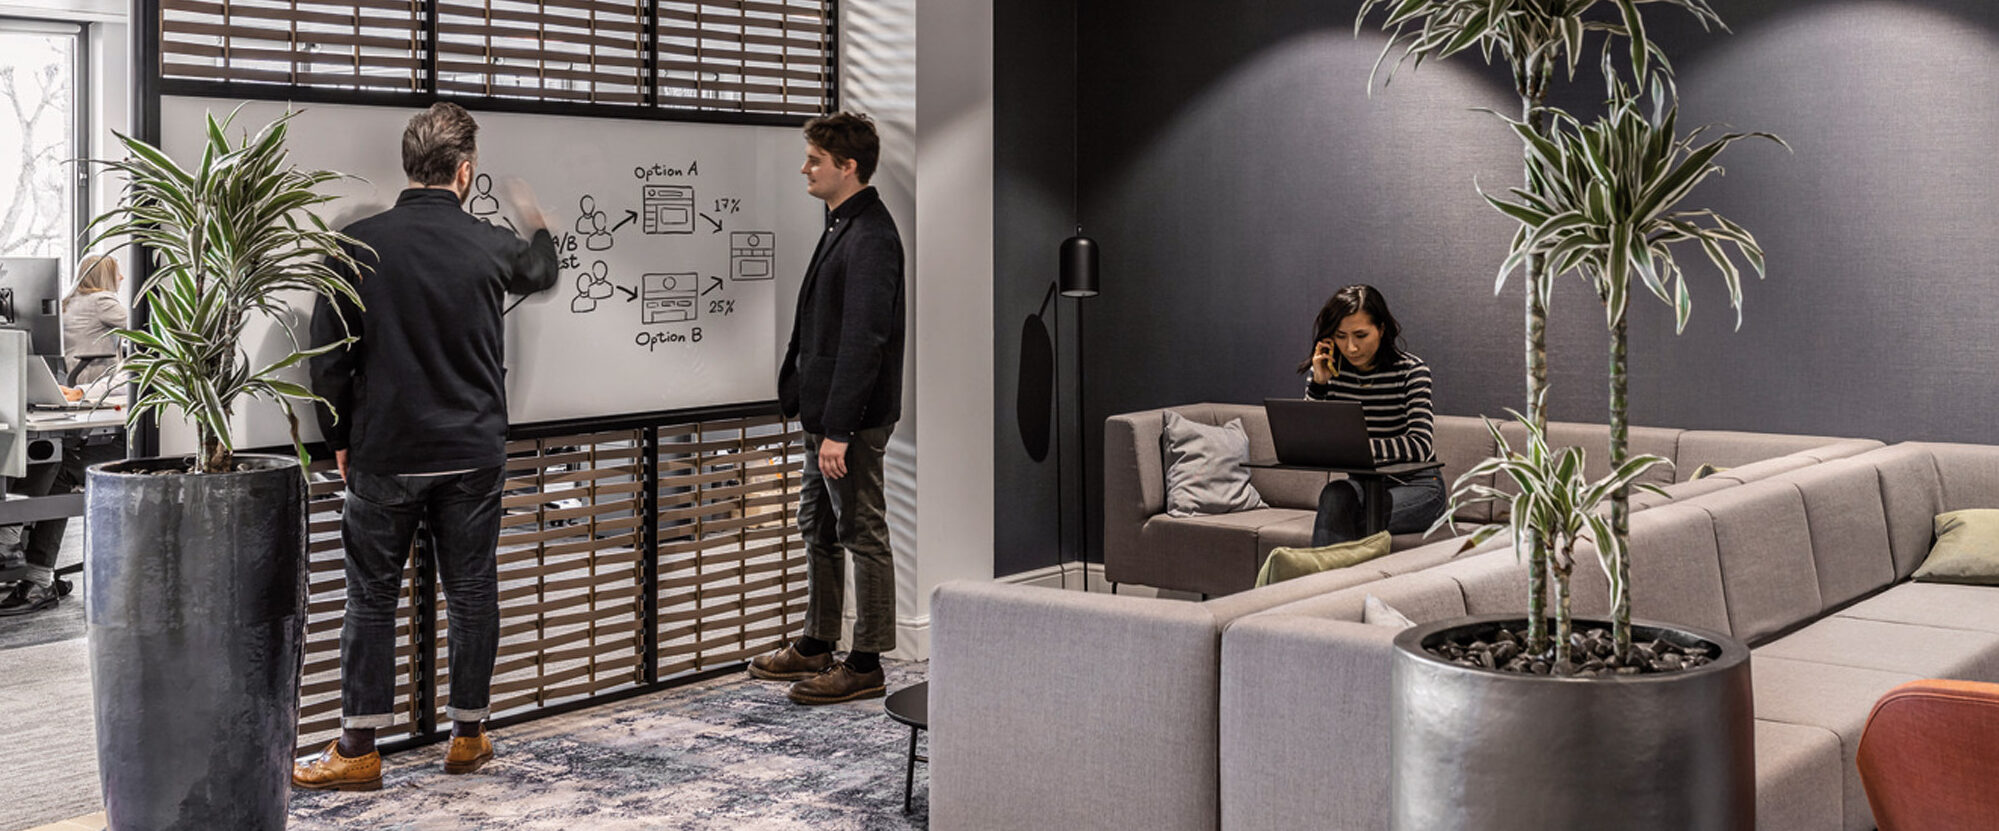 Contemporary office lounge with two individuals discussing a whiteboard, another seated on a gray modular sofa. Slatted wooden screens, lush potted plants, and a patterned area rug create a warm, inviting workspace.